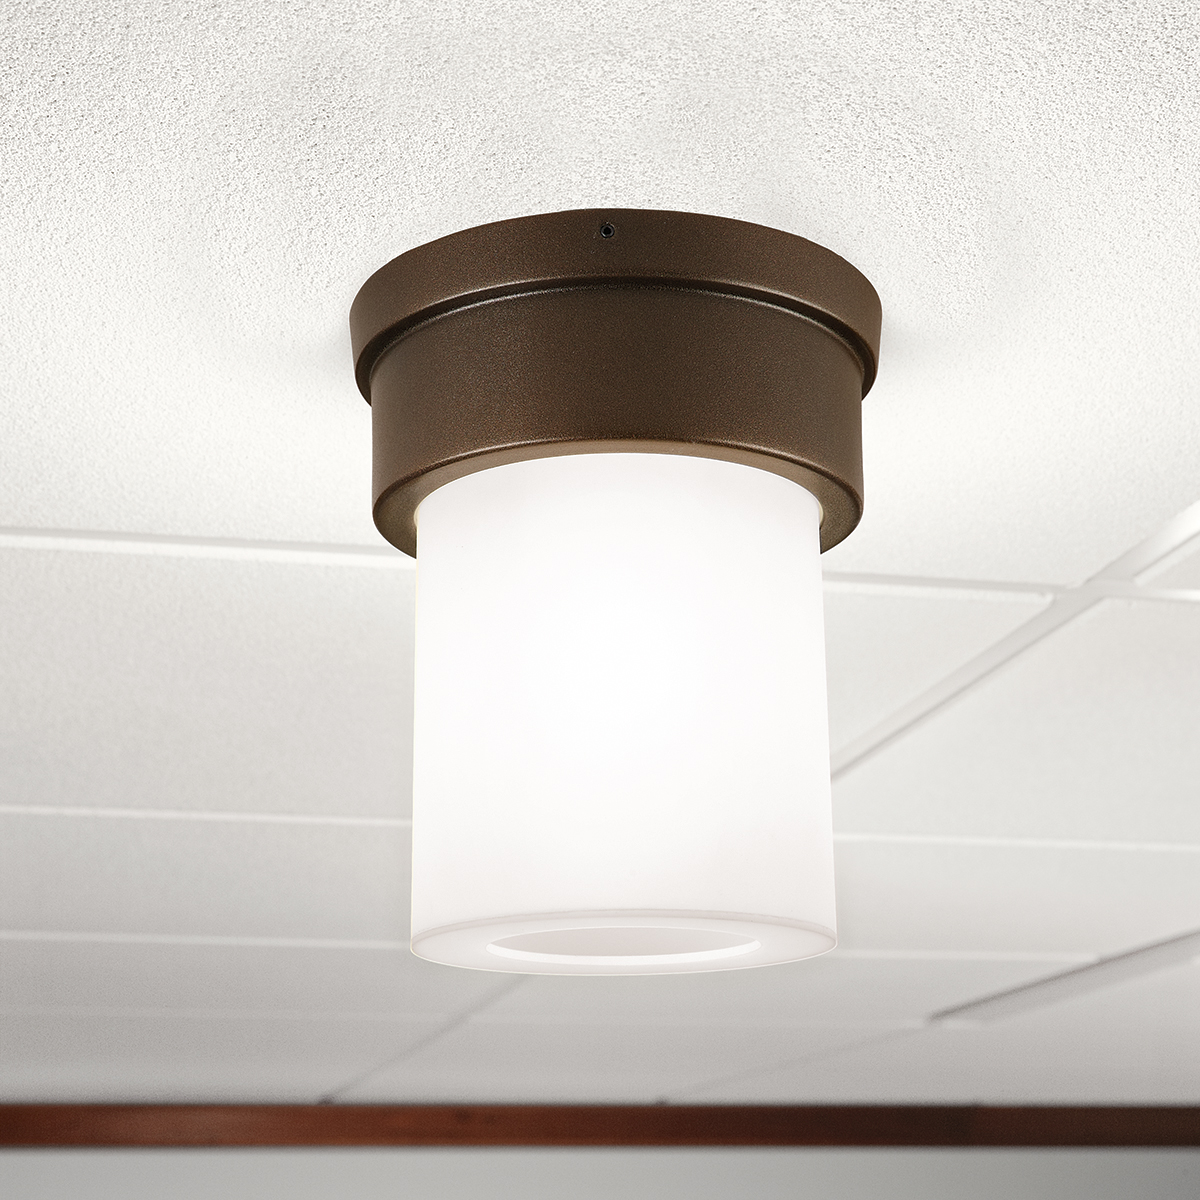 A small, luminous ceiling-mounted cylinder fixture with a solid base